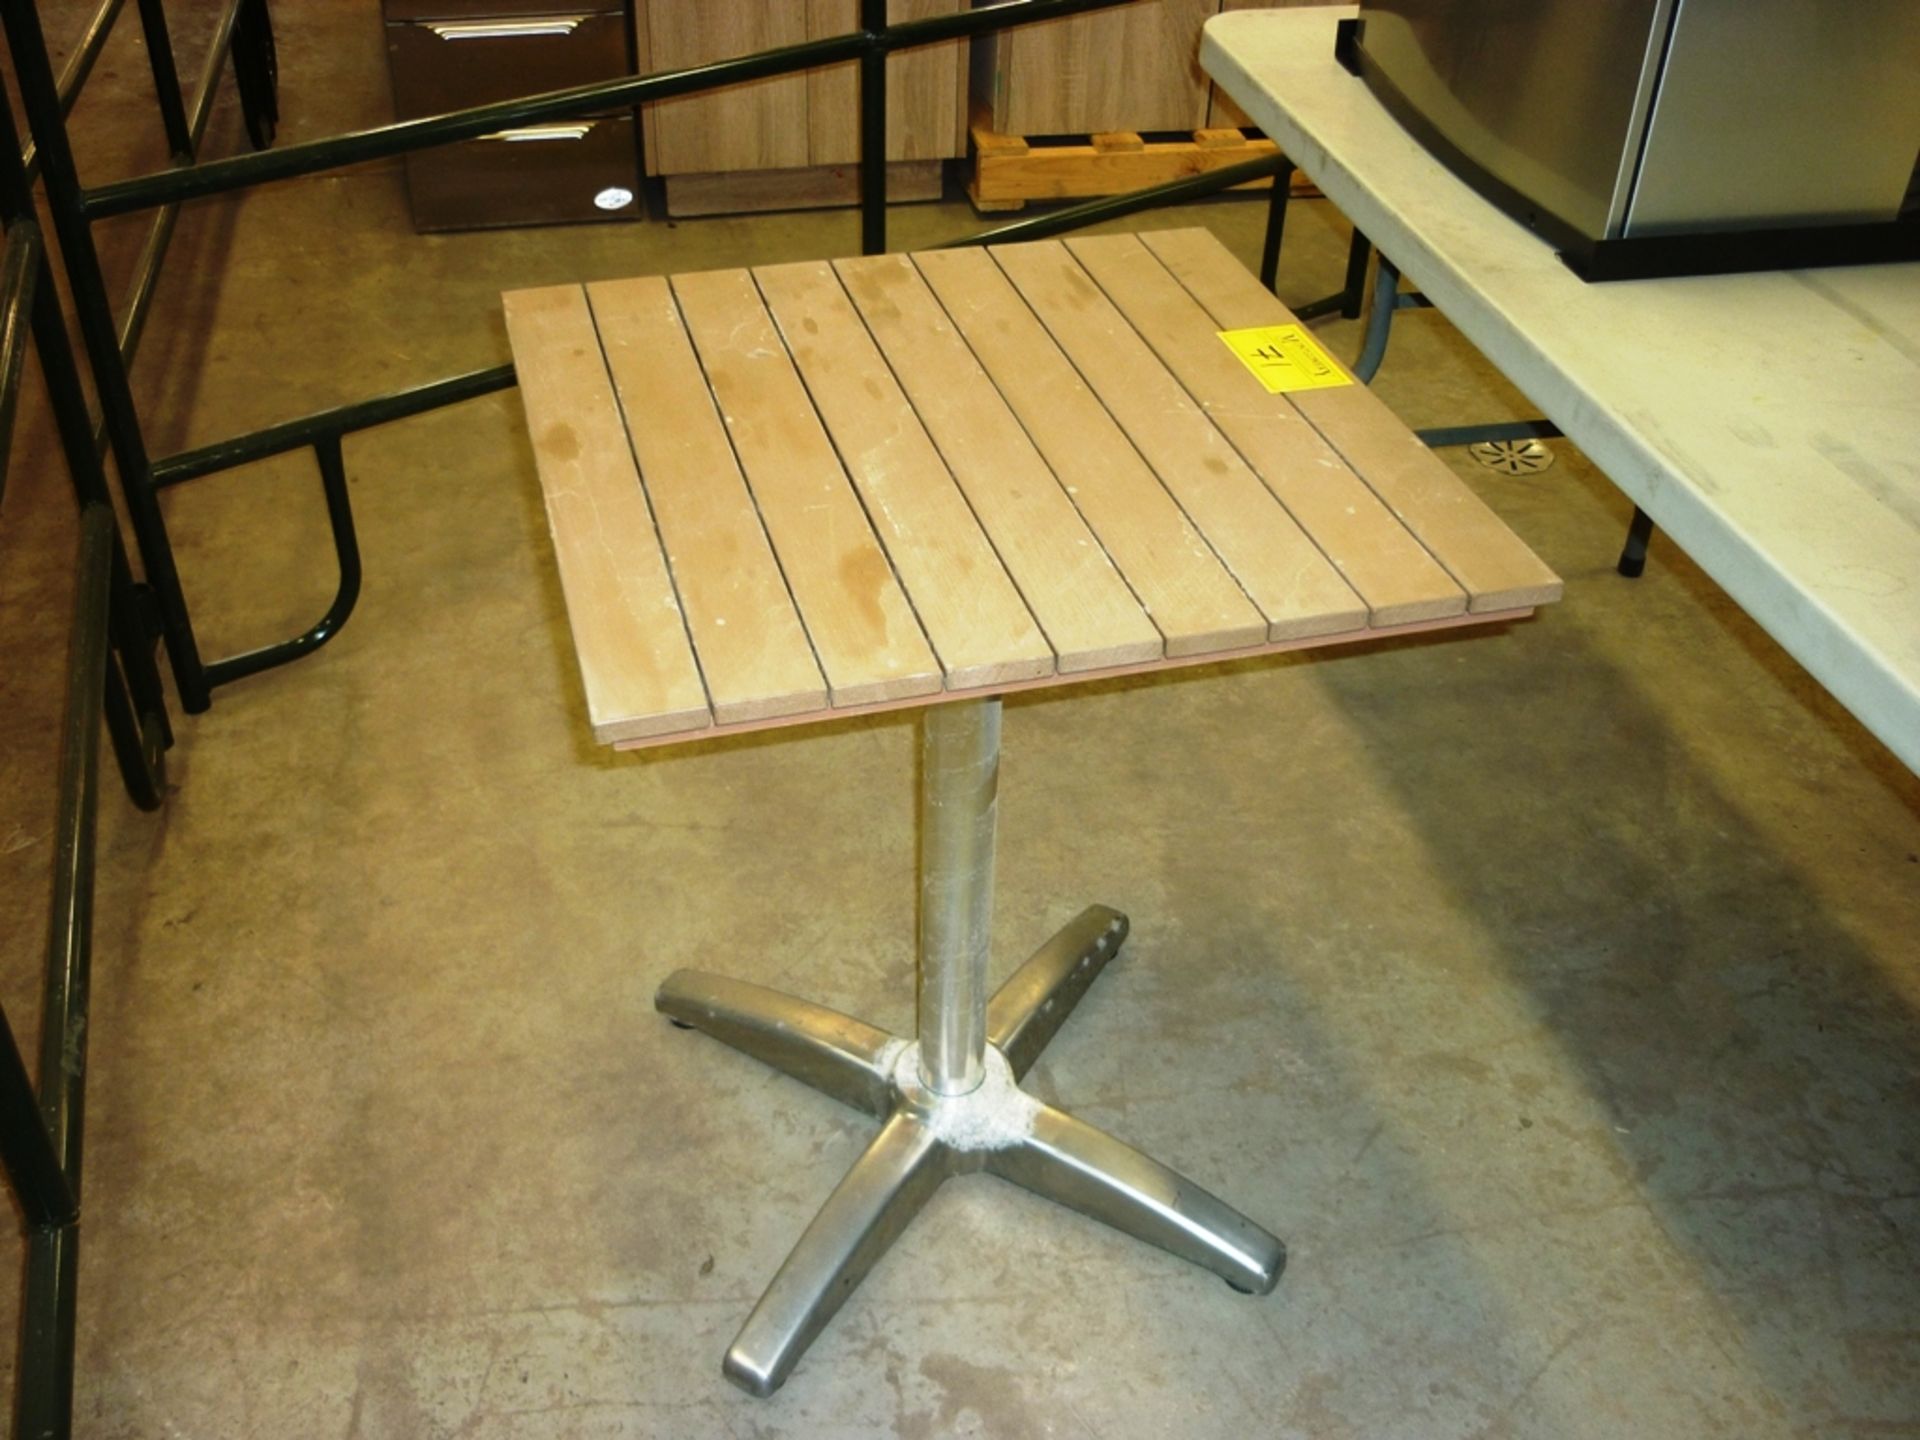 24"X24" SP RESTAURANT TABLE W/TILTING TOP - Image 2 of 2